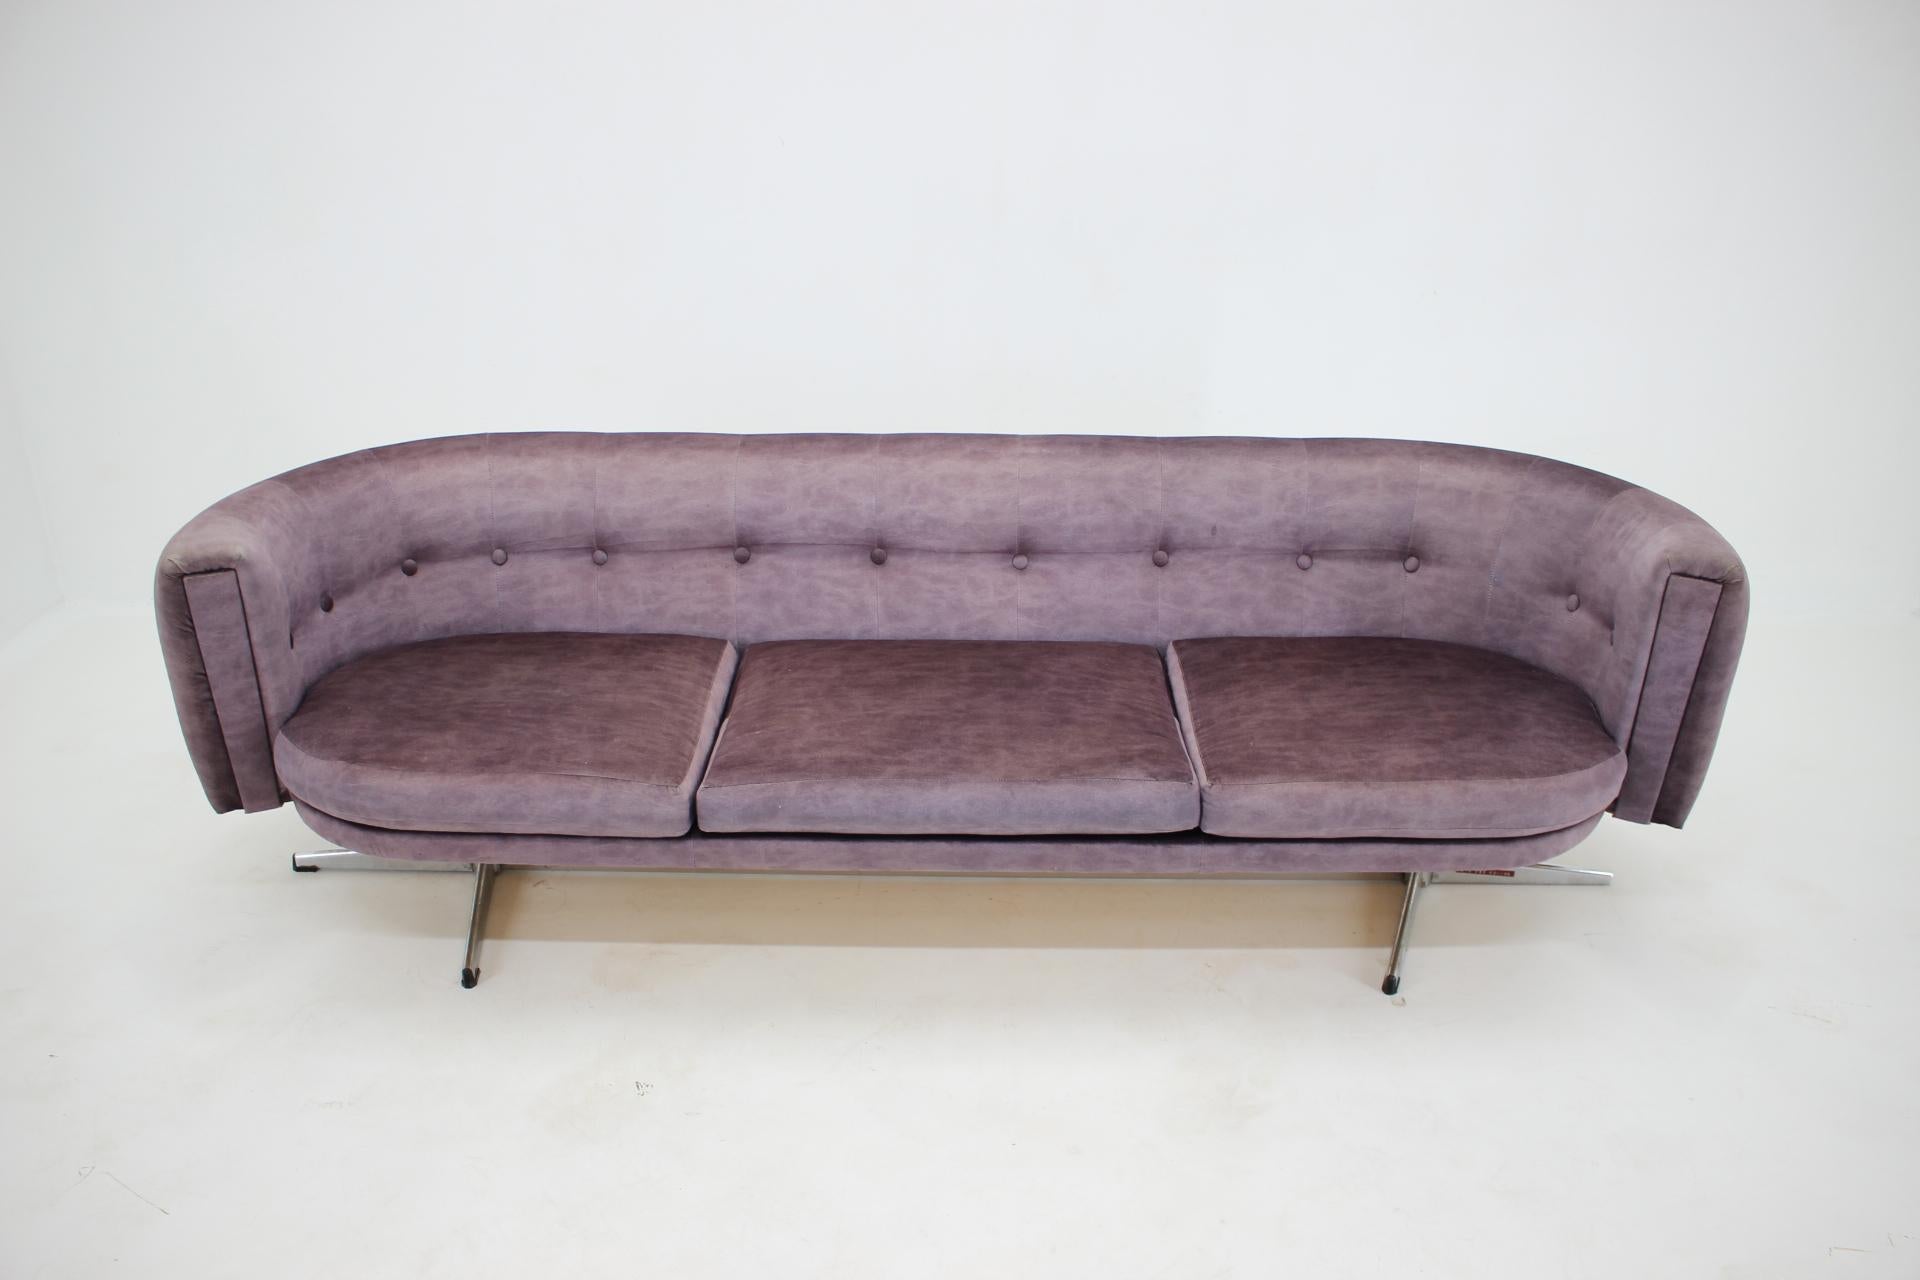 - Good original condition 
- It has been reupholstered many years ago
- Measures: High of seat 36 cm.